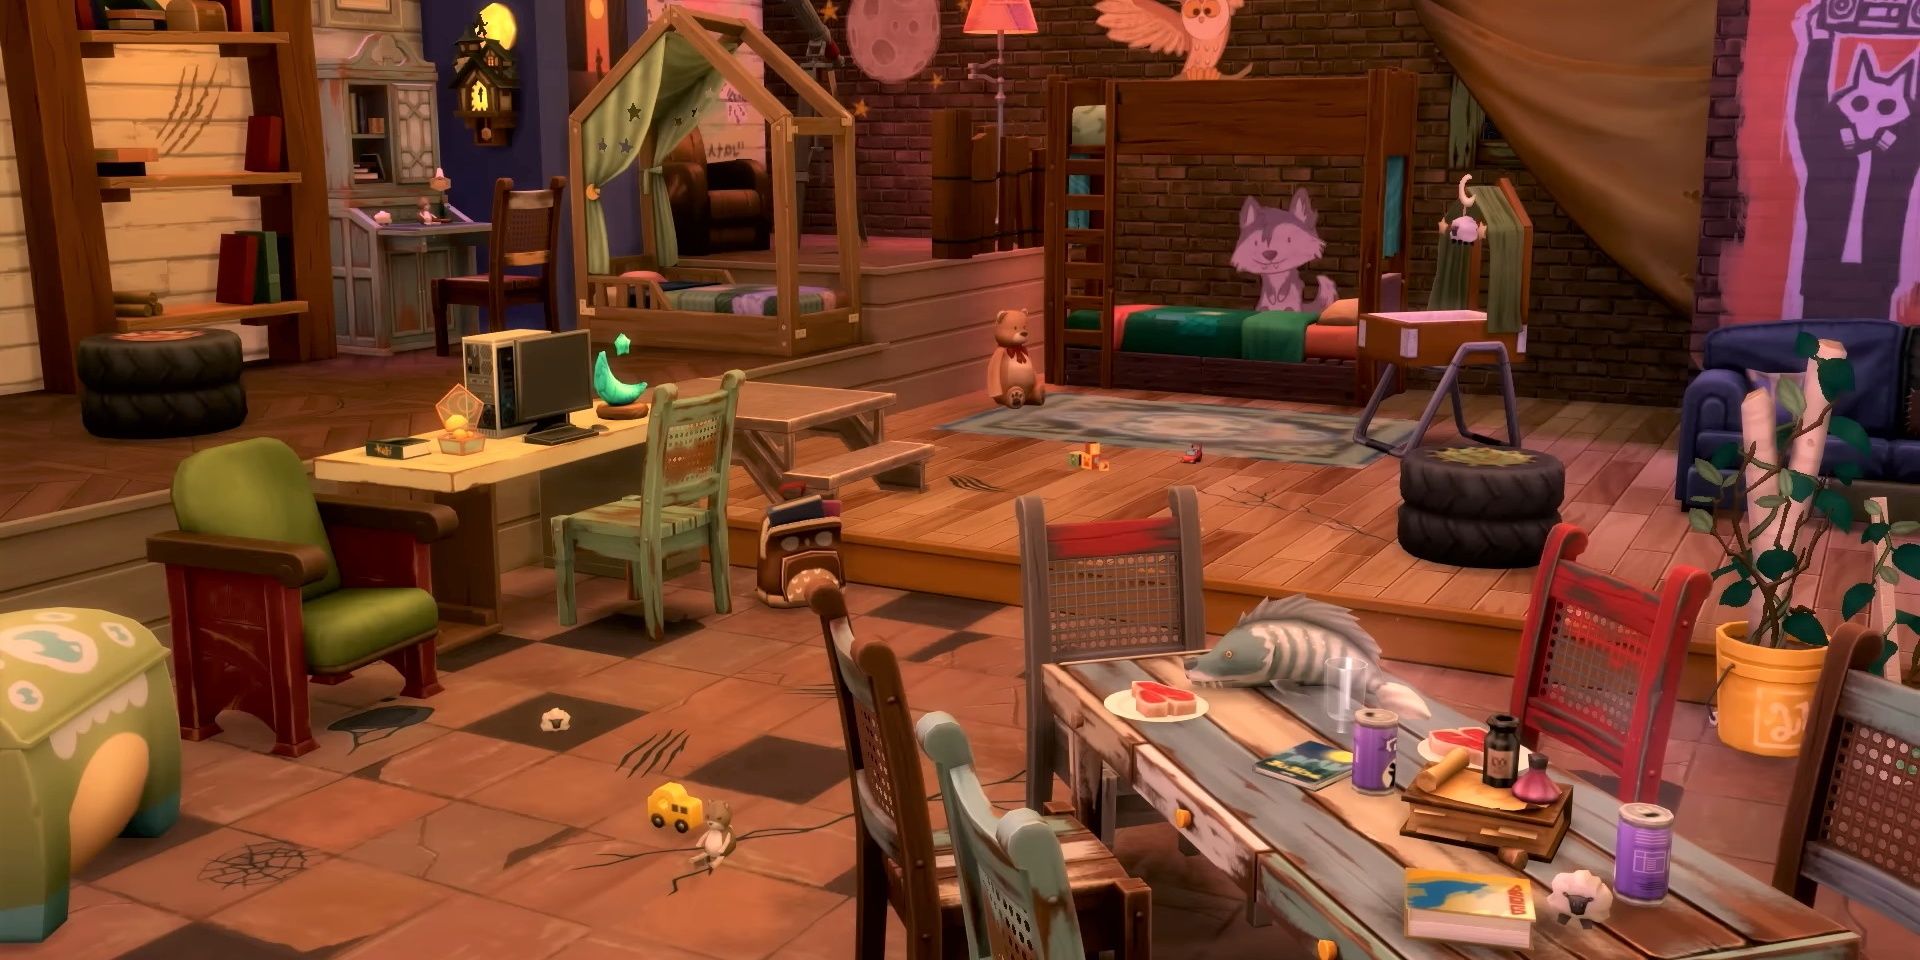 A sneak peak of a cluttered Werewolves hangout, complete with beds, a computer, and tables full of food and books